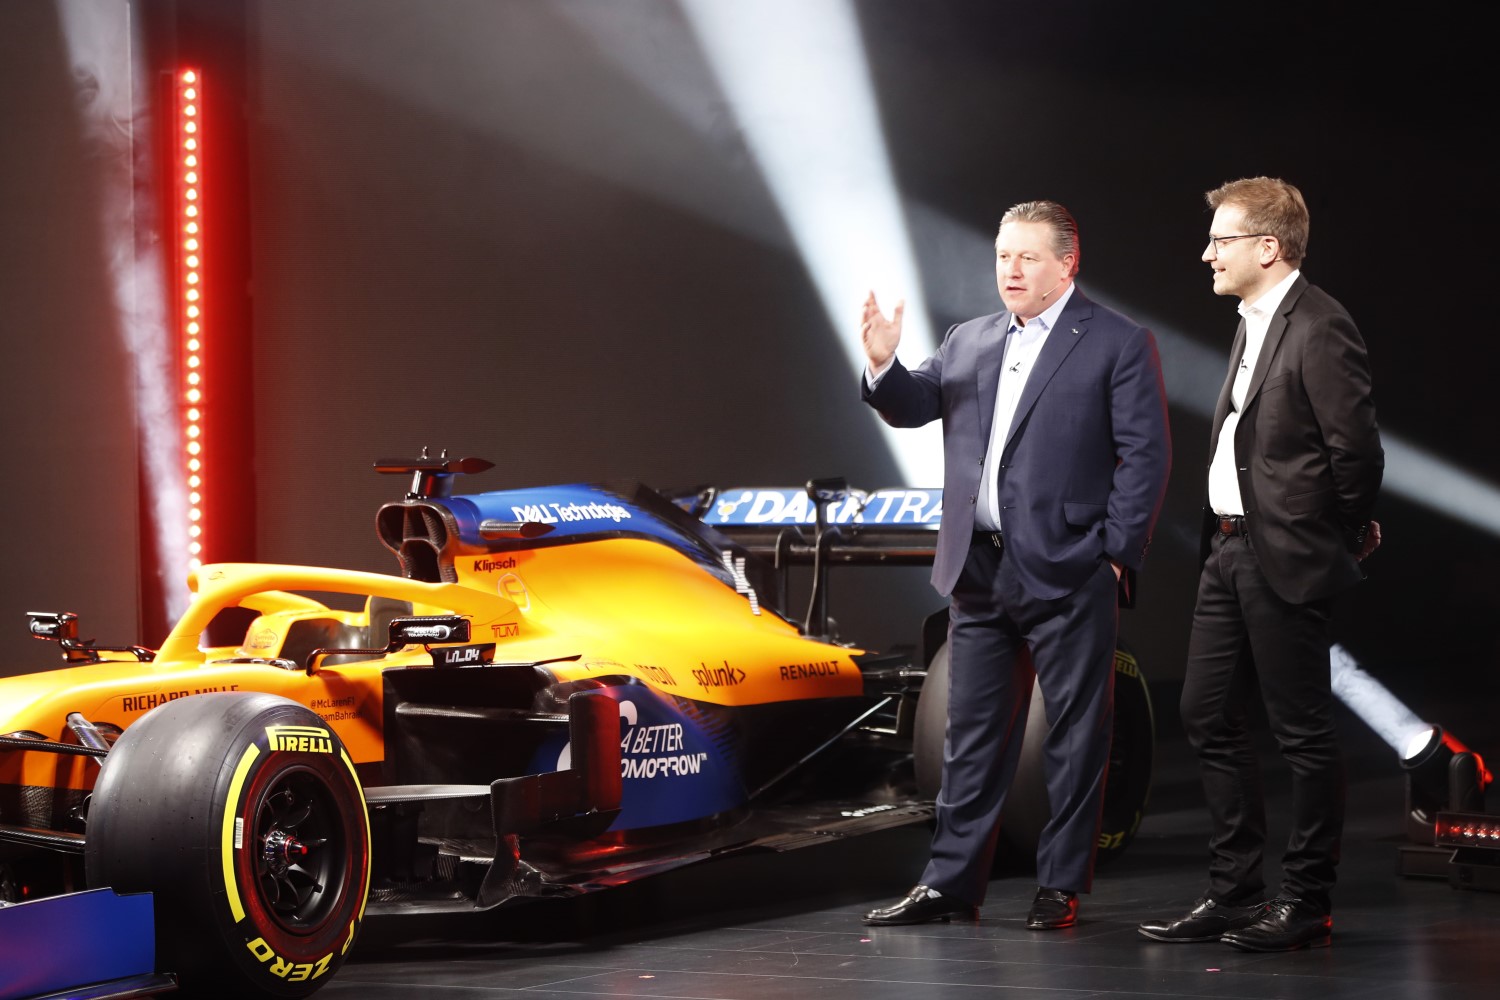 McLaren blamed Honda when all along it was their inferior chassis